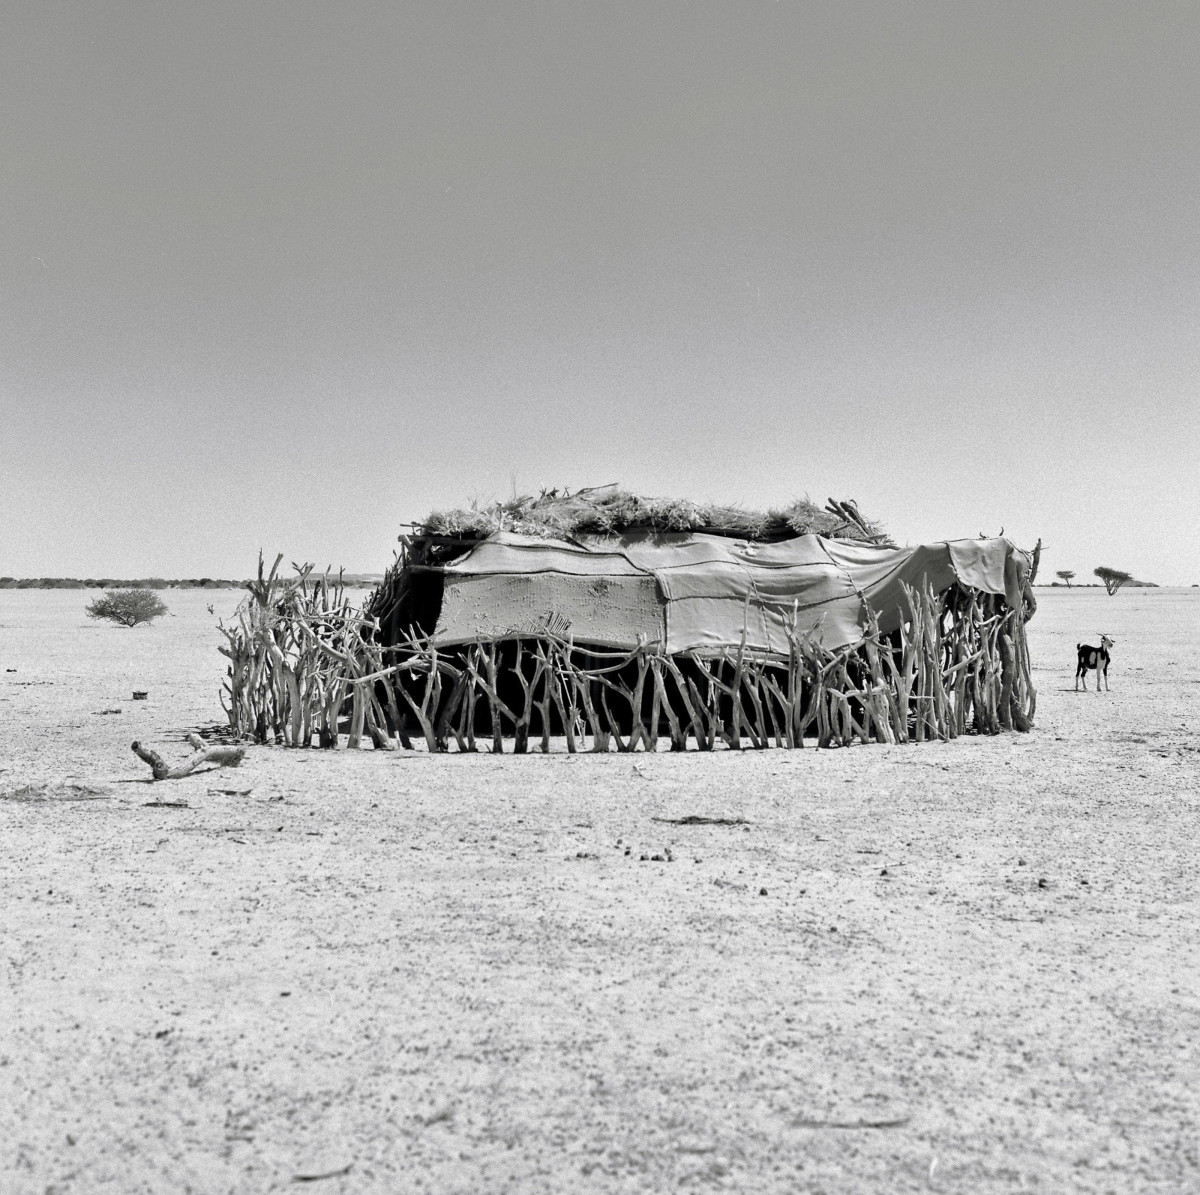 Although Sudanese camel herders live a nomadic existence, they keep simple dwellings scattered across the desert for women, children, and the elderly. With roofs made of wool, these structures provide shade from the relentless sun and a base for the family.